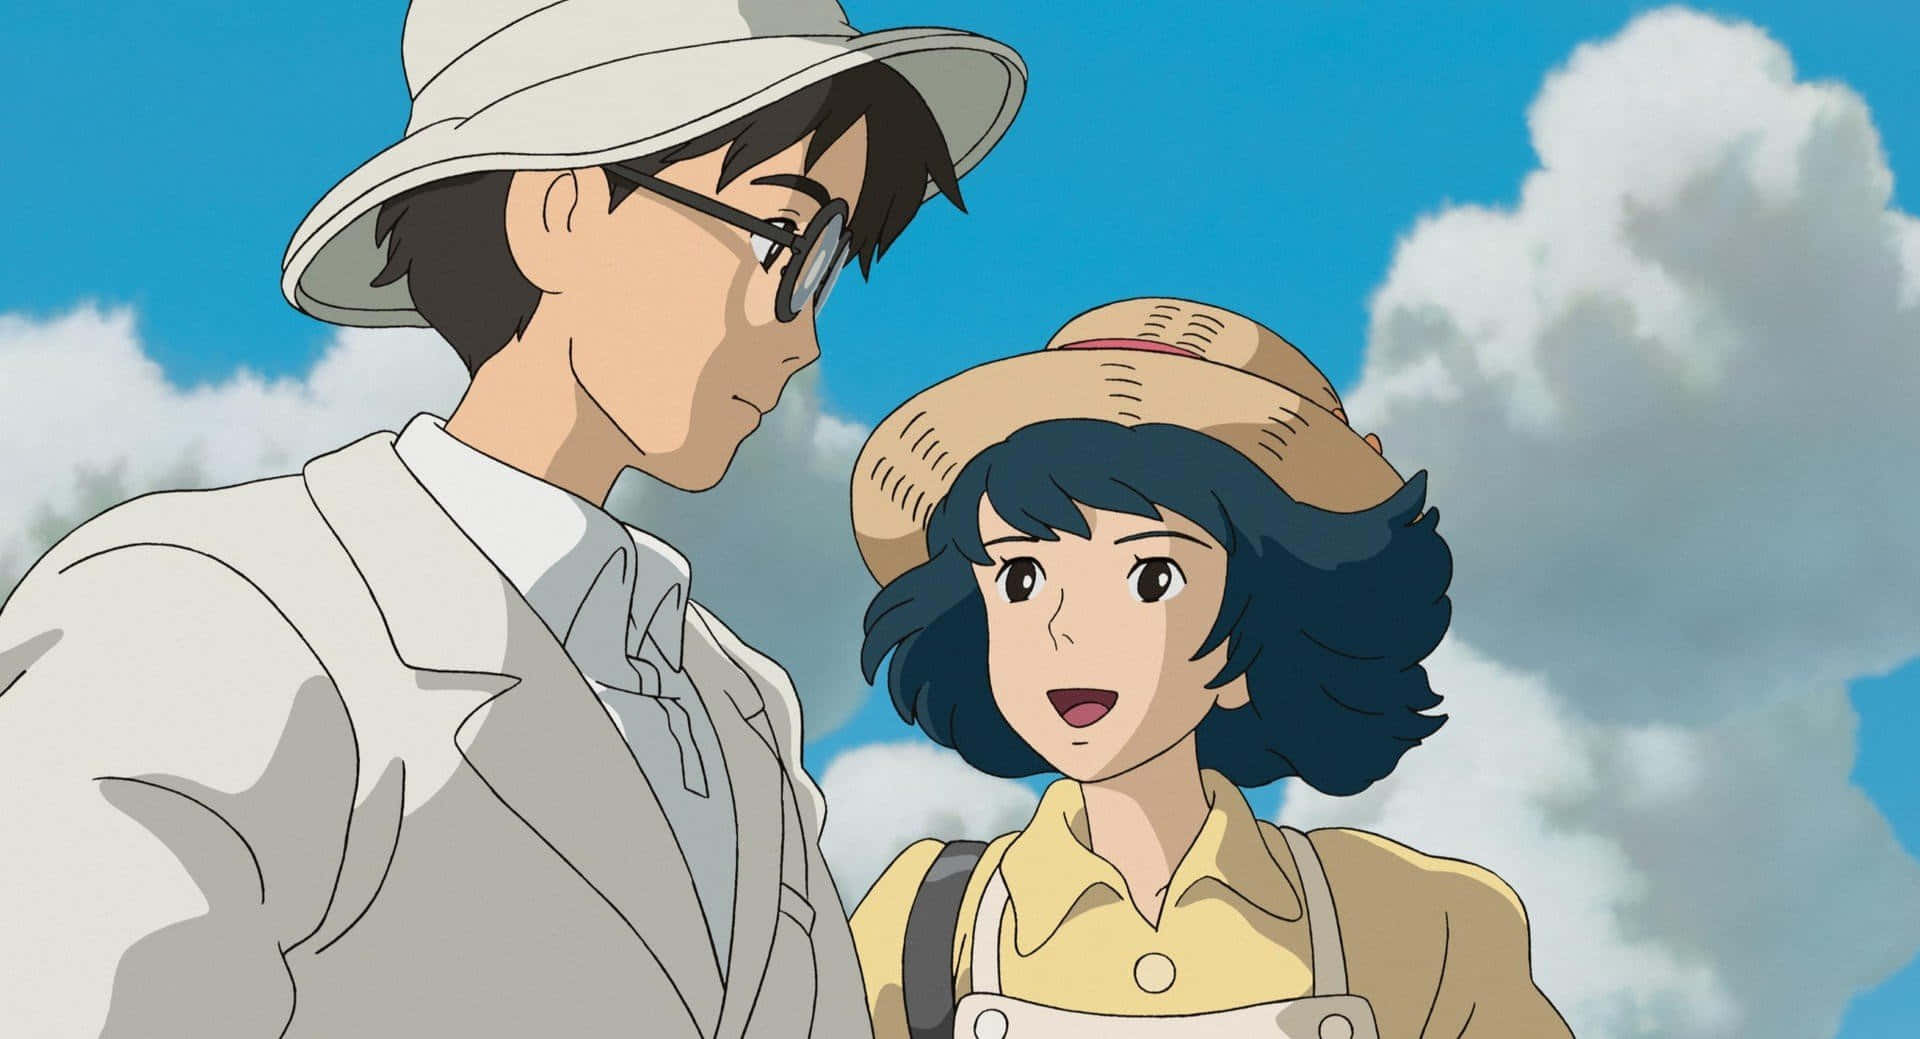 Soar, Dream, and Aspire - Take Flight with The Wind Rises Wallpaper